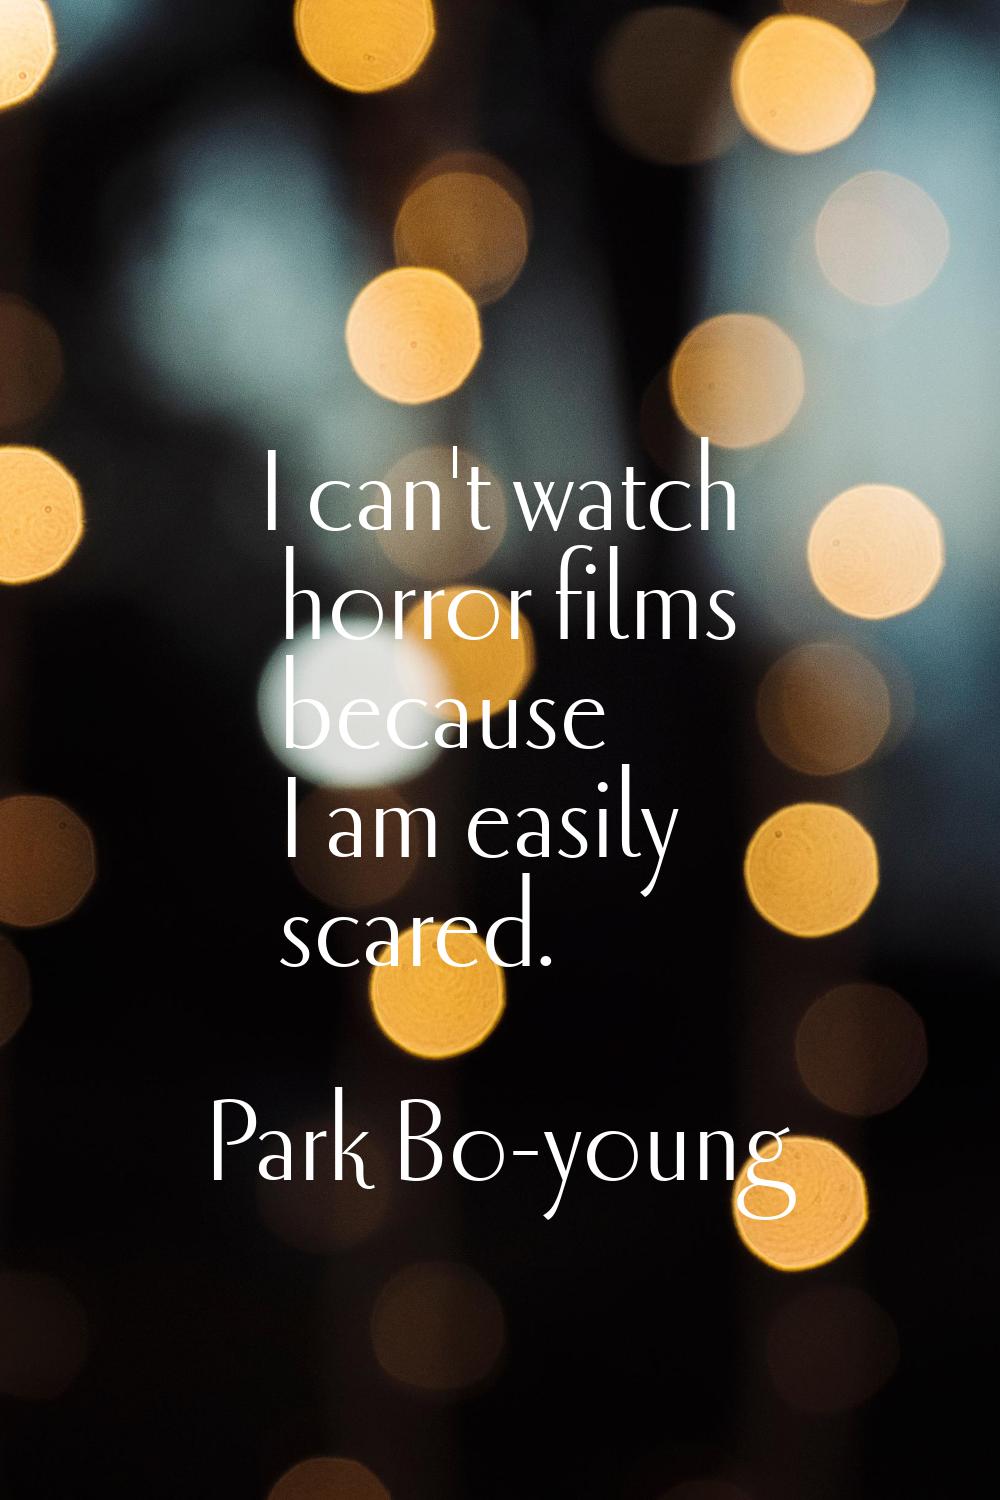 I can't watch horror films because I am easily scared.